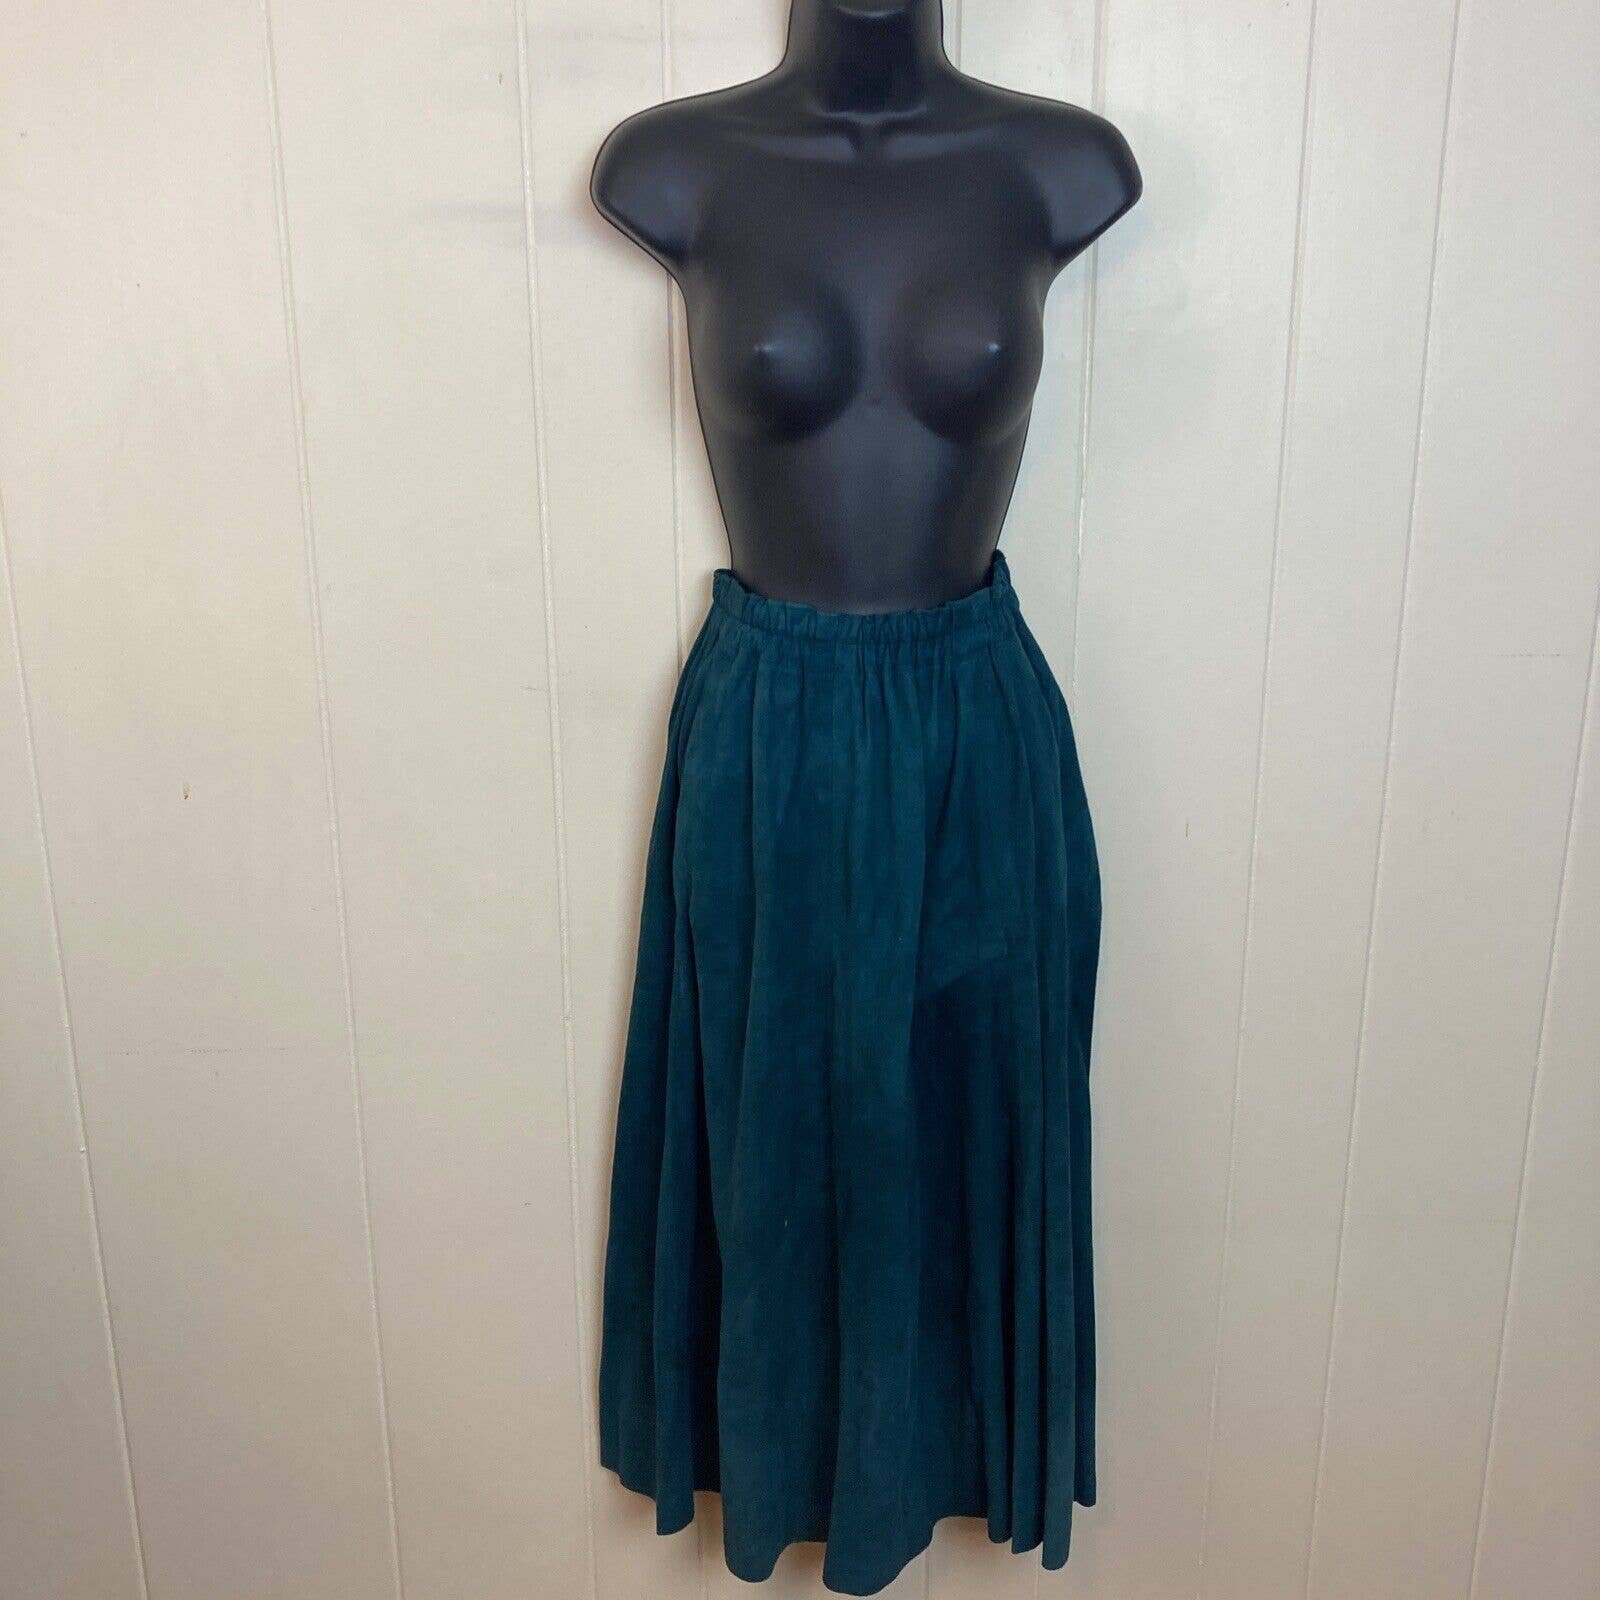 Fashion Vintage Sueded Cotton Full Skirt Small Daytime Everyday Dark Teal Maxi fNgf416RB Fashion